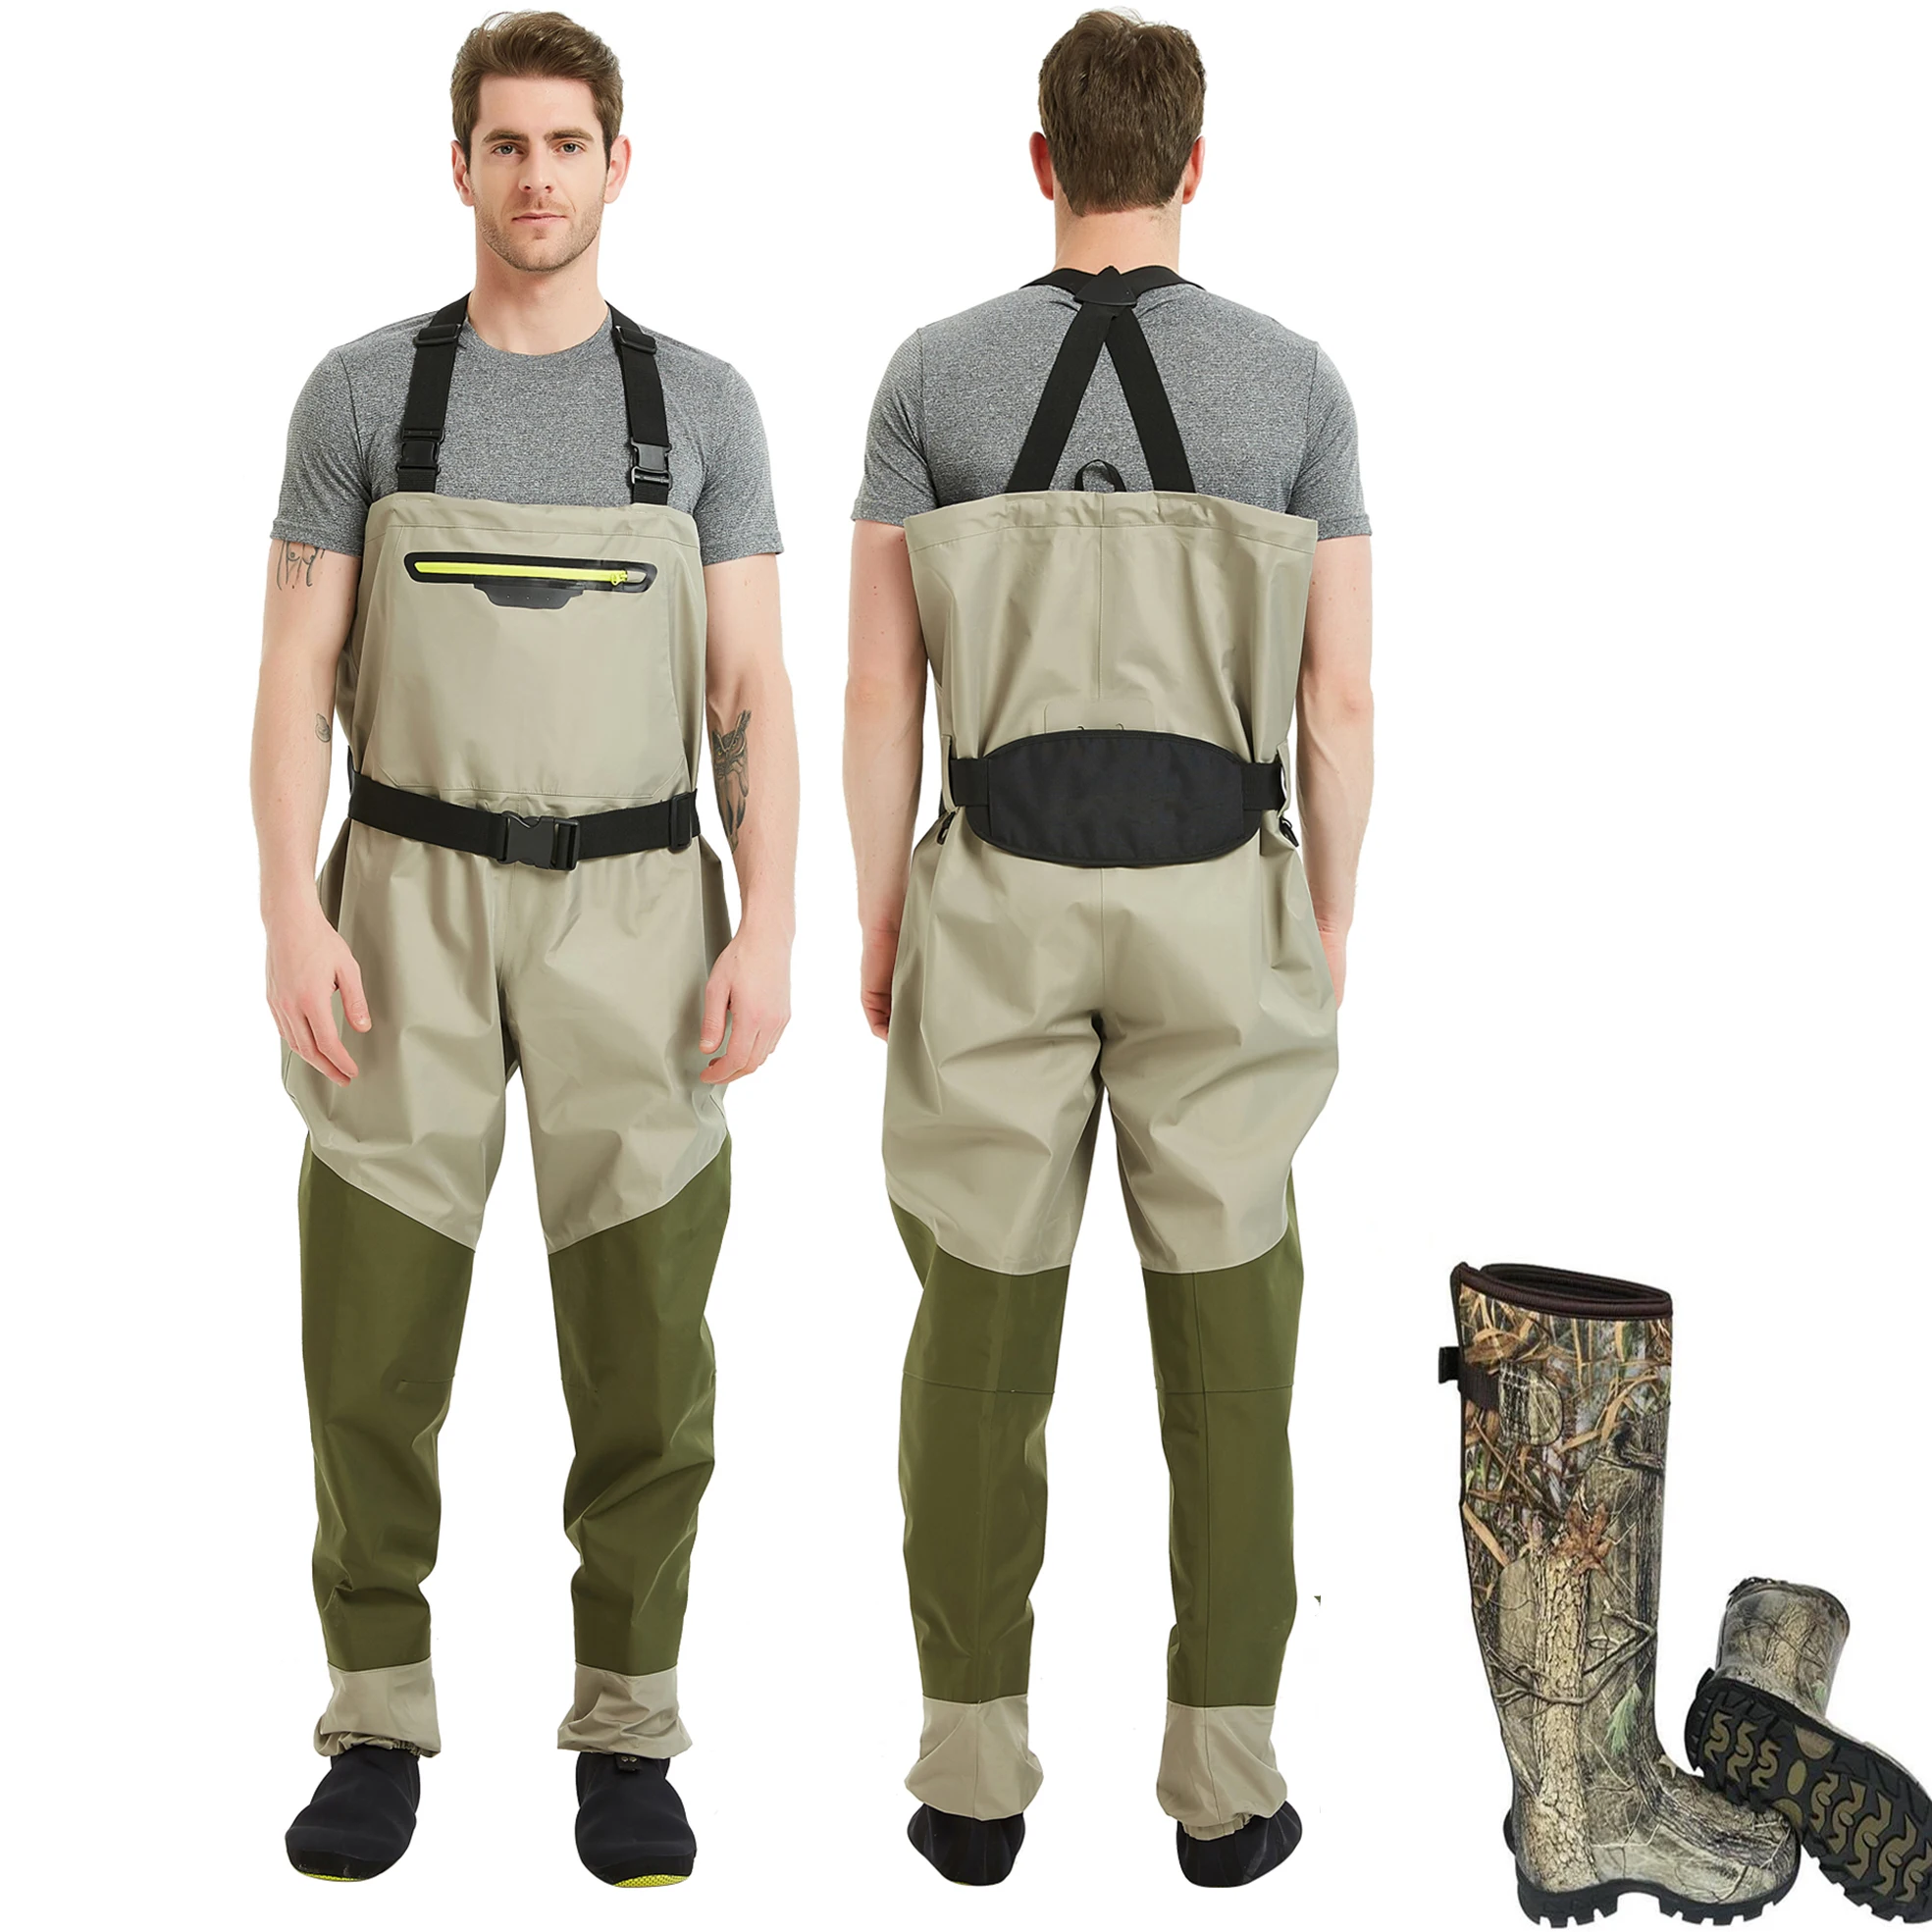 https://ae01.alicdn.com/kf/S474775baf4b84768b0bab598531e684eF/Mens-Fishing-Chest-Waders-Caster-FLYING-Breathable-Neoprene-Waders-Hunting-Waders-FISHING-WADER.jpg